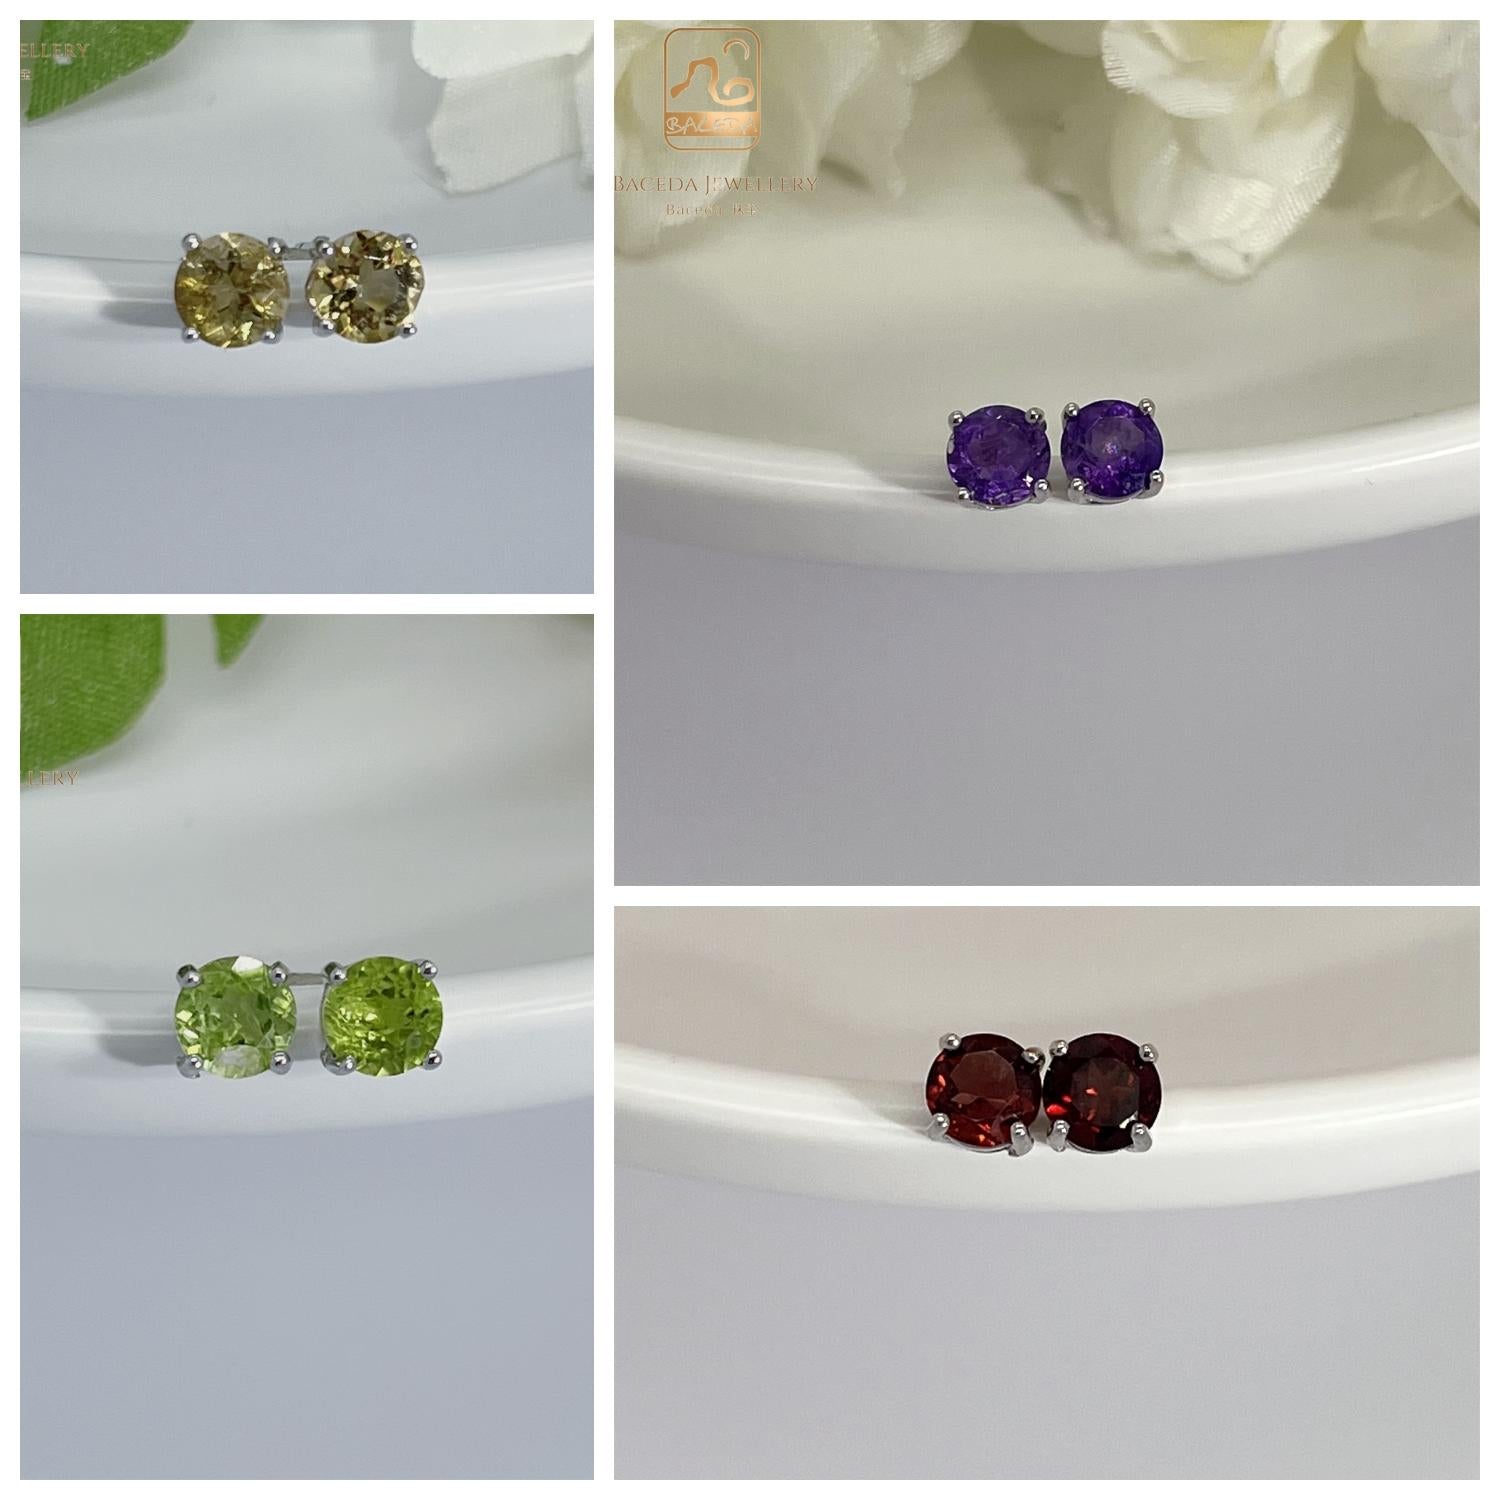 Baceda S925 Earrings 4 Claw daily design amethyst peridot citrine garnet topaz with lock and certificate